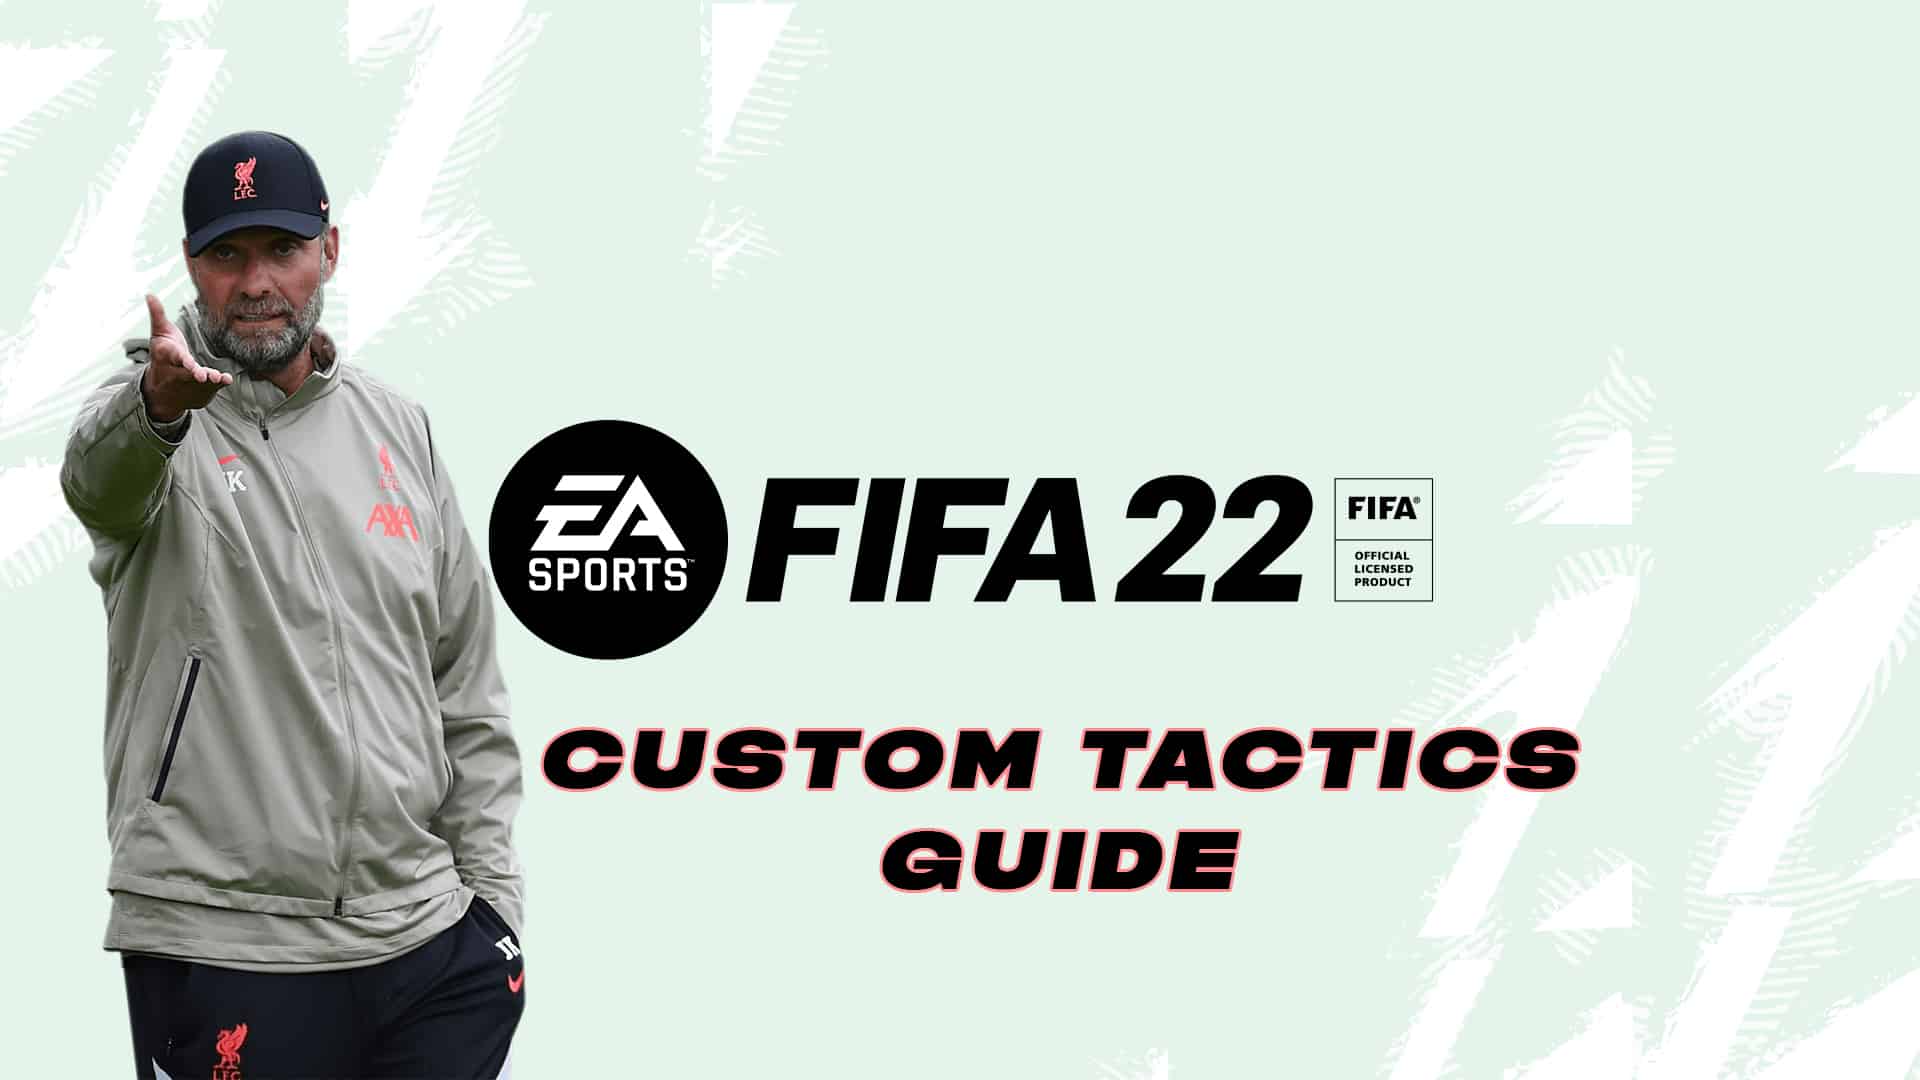 Fifa 22 The Most Used Modules In Fut 22 Custom Tactics Guide And Player Instructions Fifaultimateteam It Uk